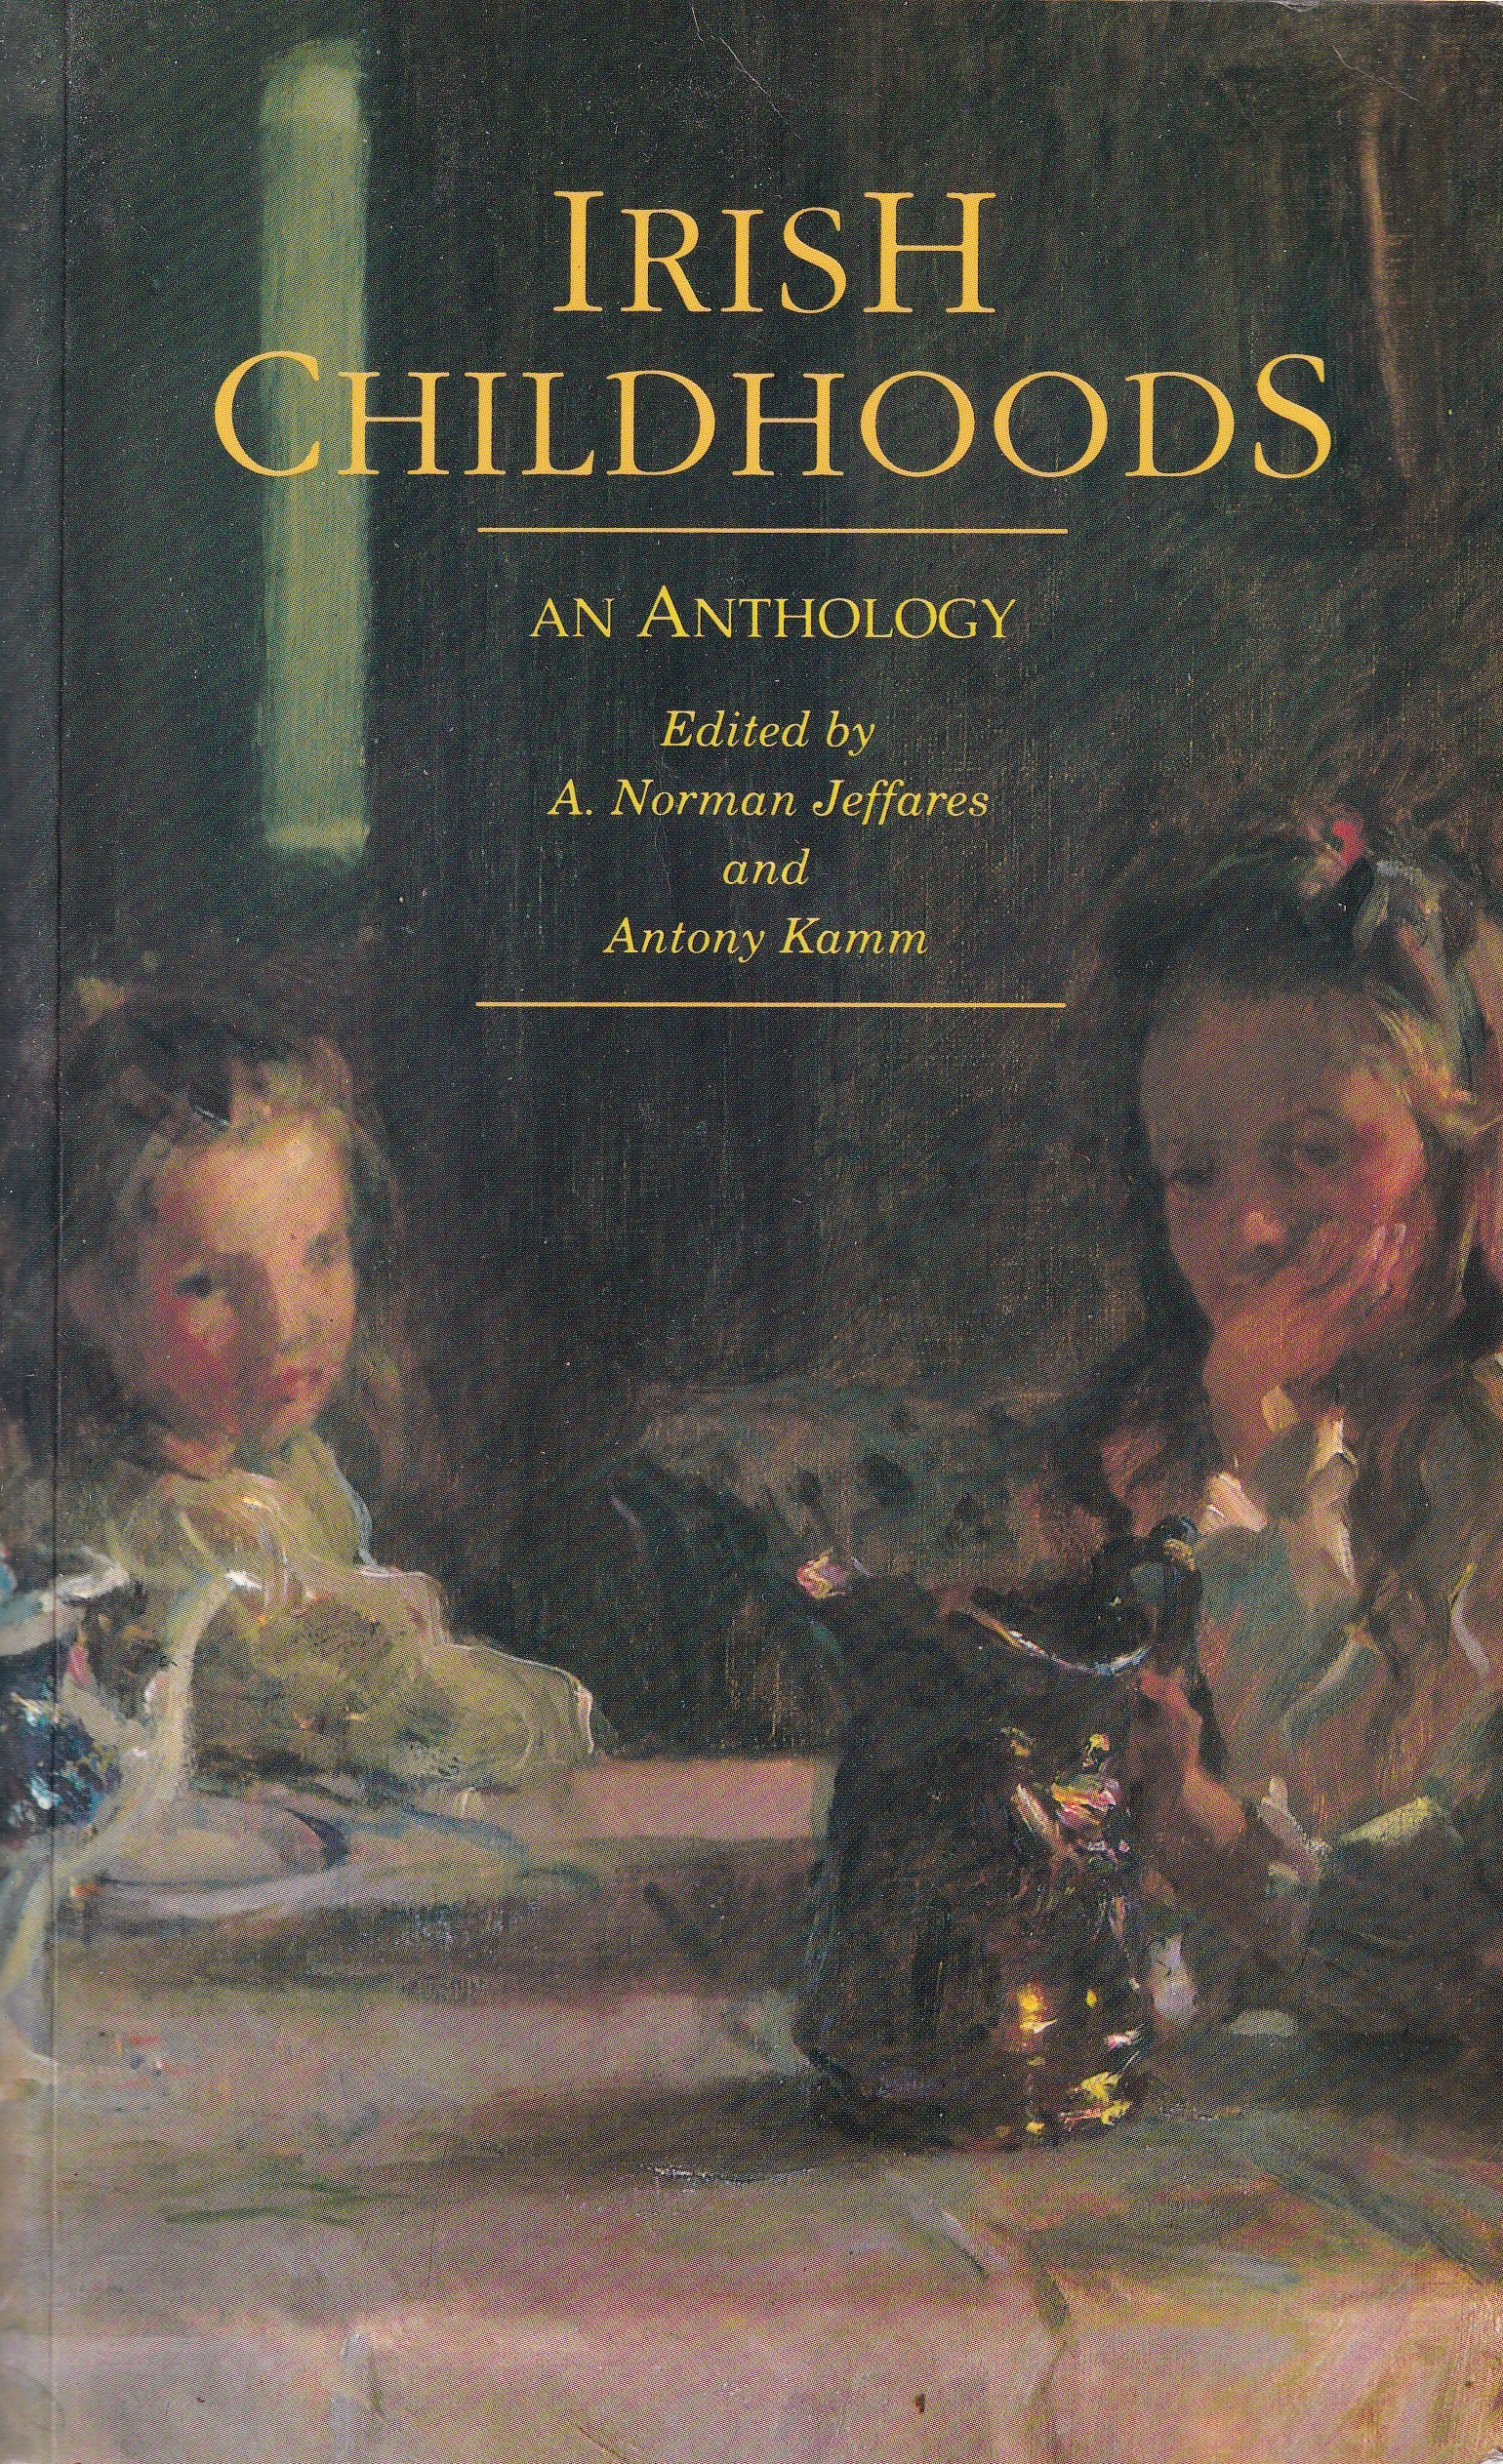 Irish Childhoods: An Anthology by A. Norman Jeffares and Antony Kimm (eds.)